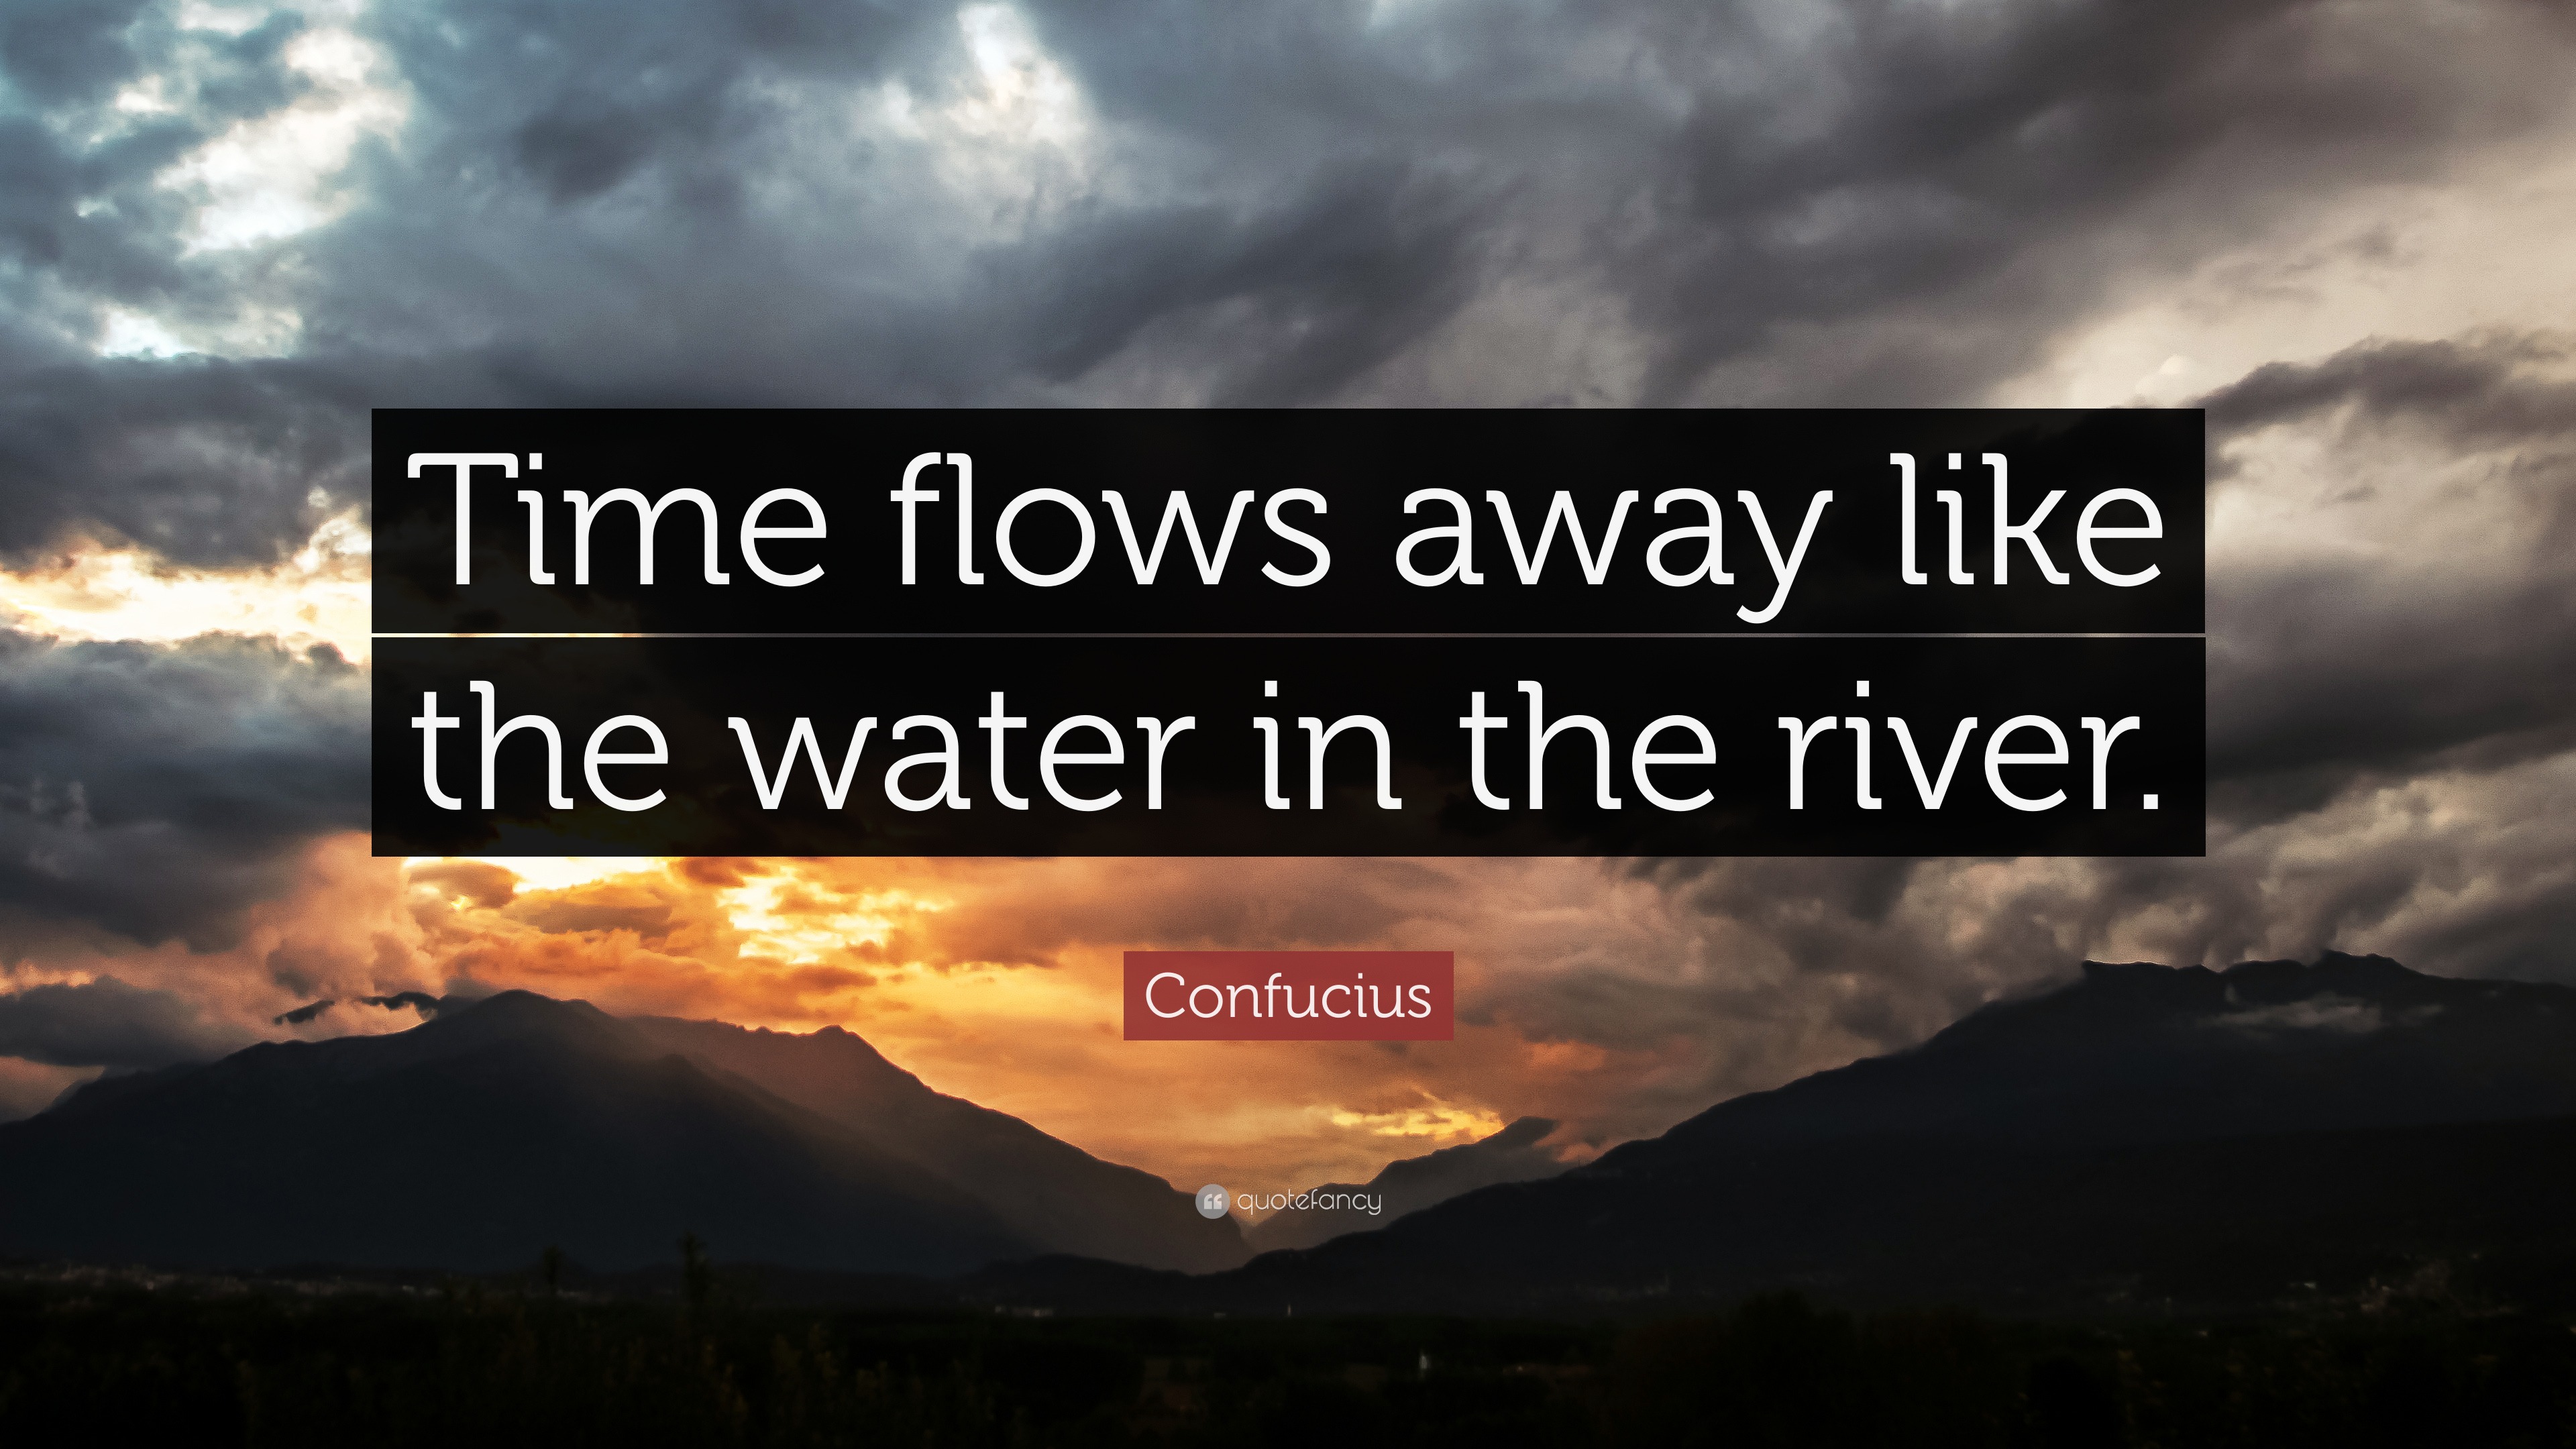 Confucius Quote “Time flows away like the water in the